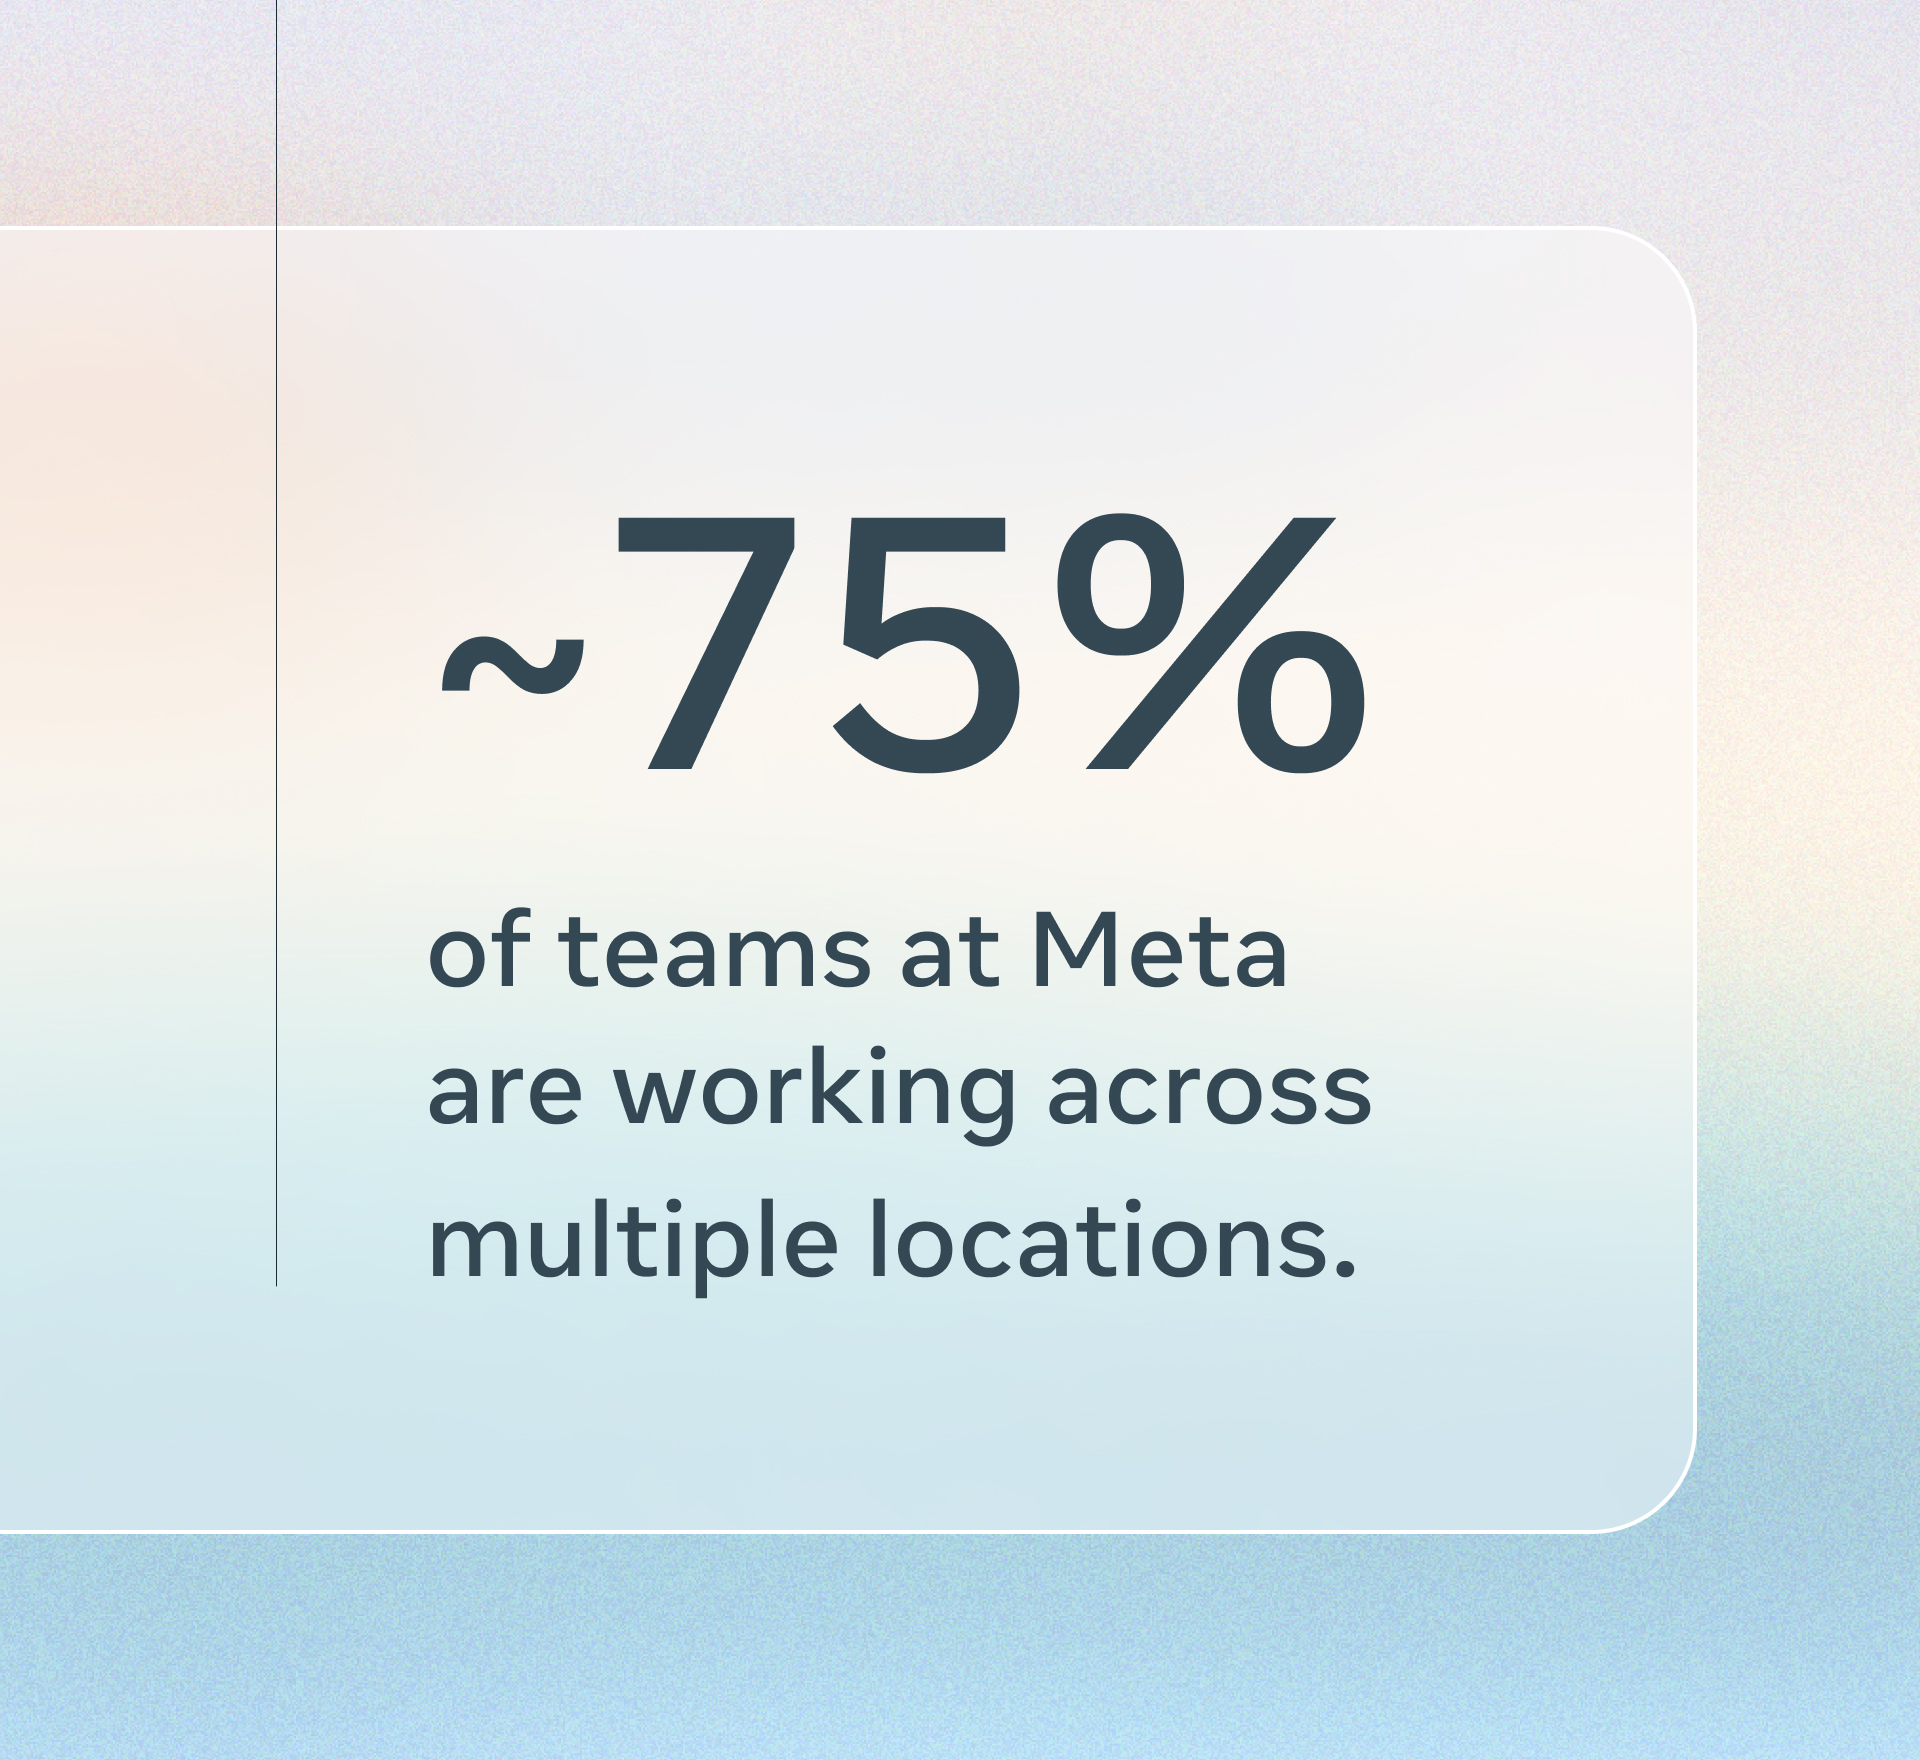 Approximately 75% of teams at Meta are working across multiple locations.